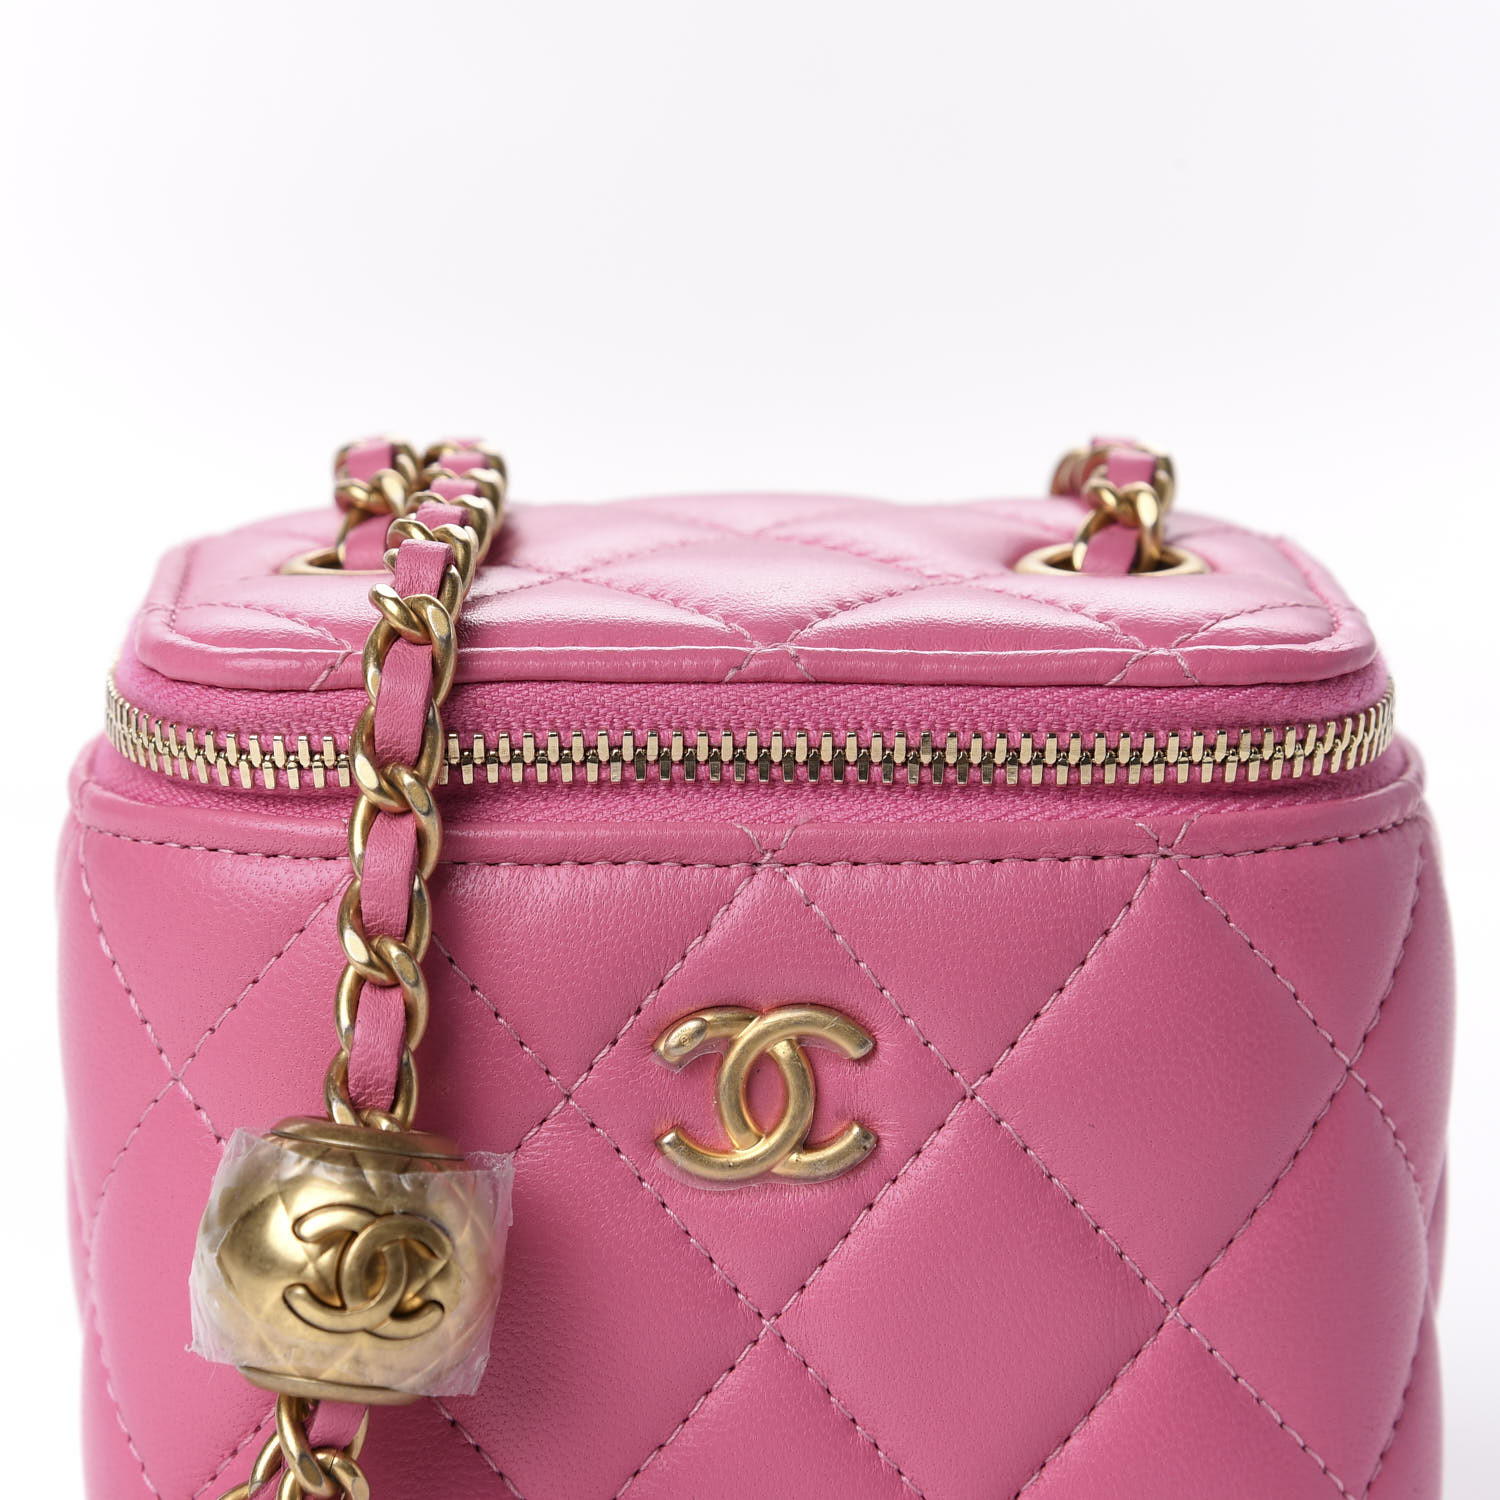 CHANEL Lambskin Quilted Pearl Crush Mini Vanity Case With Chain Pink 614396